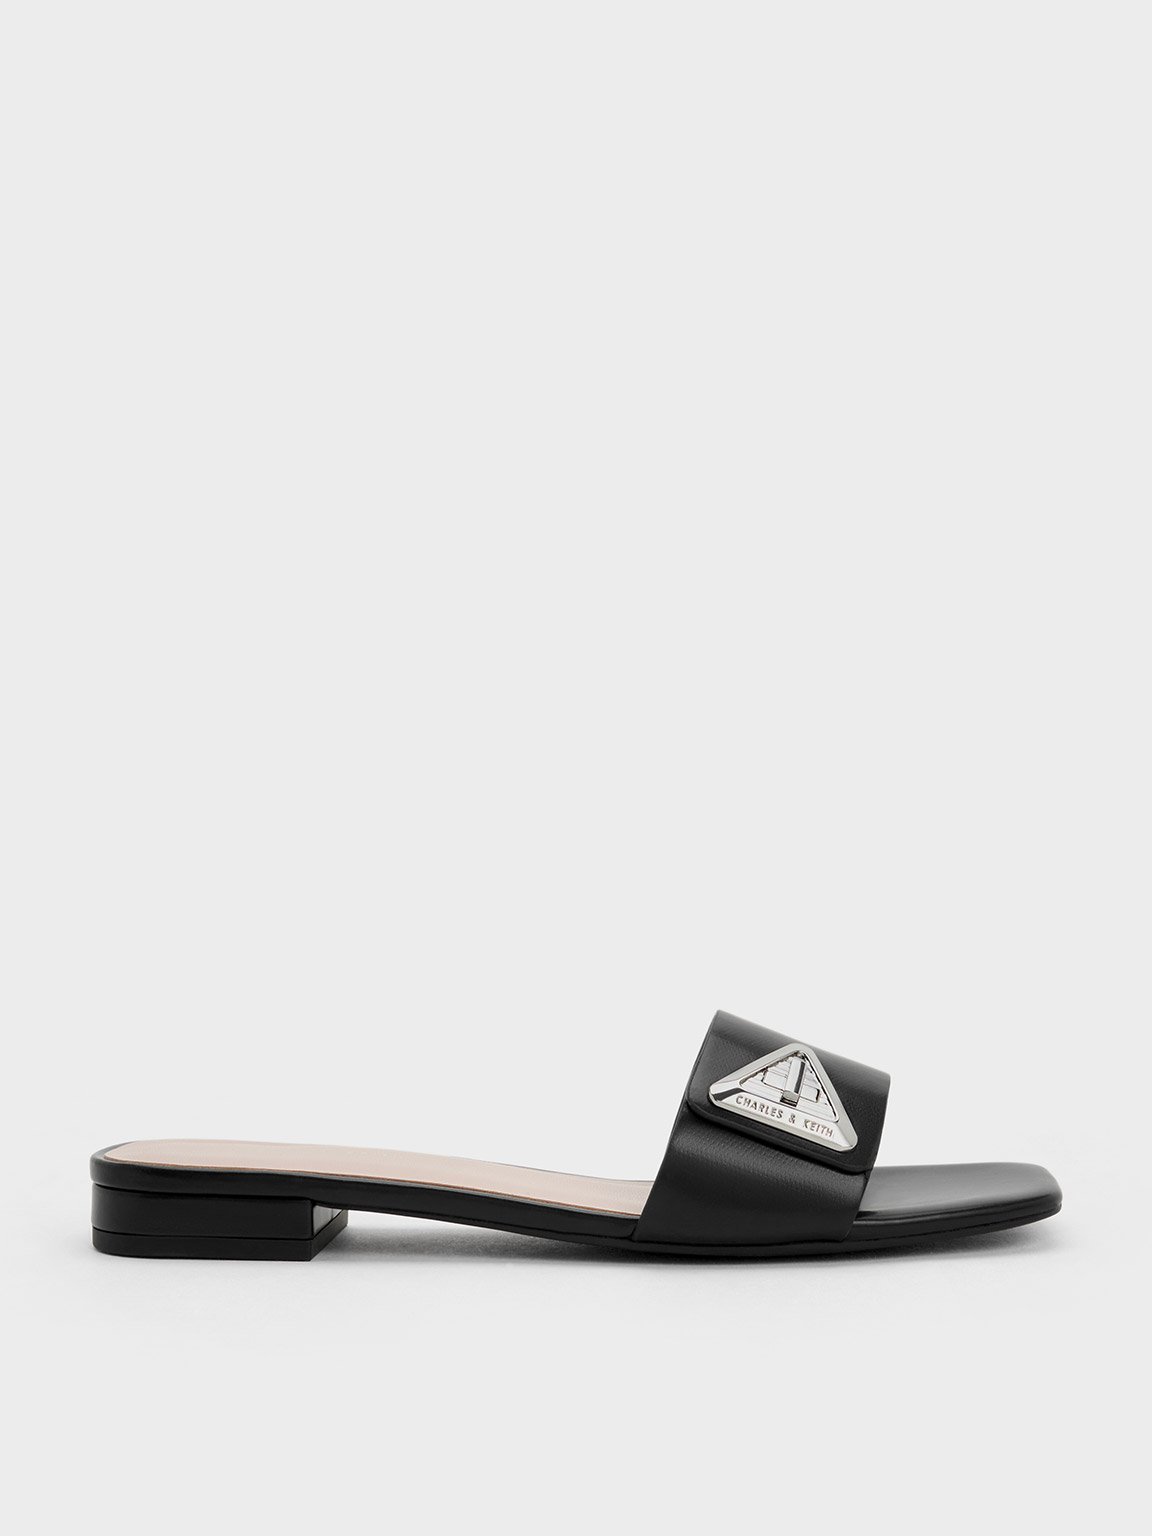 Charles & Keith Trice Metallic Accent Slide Sandals In Black